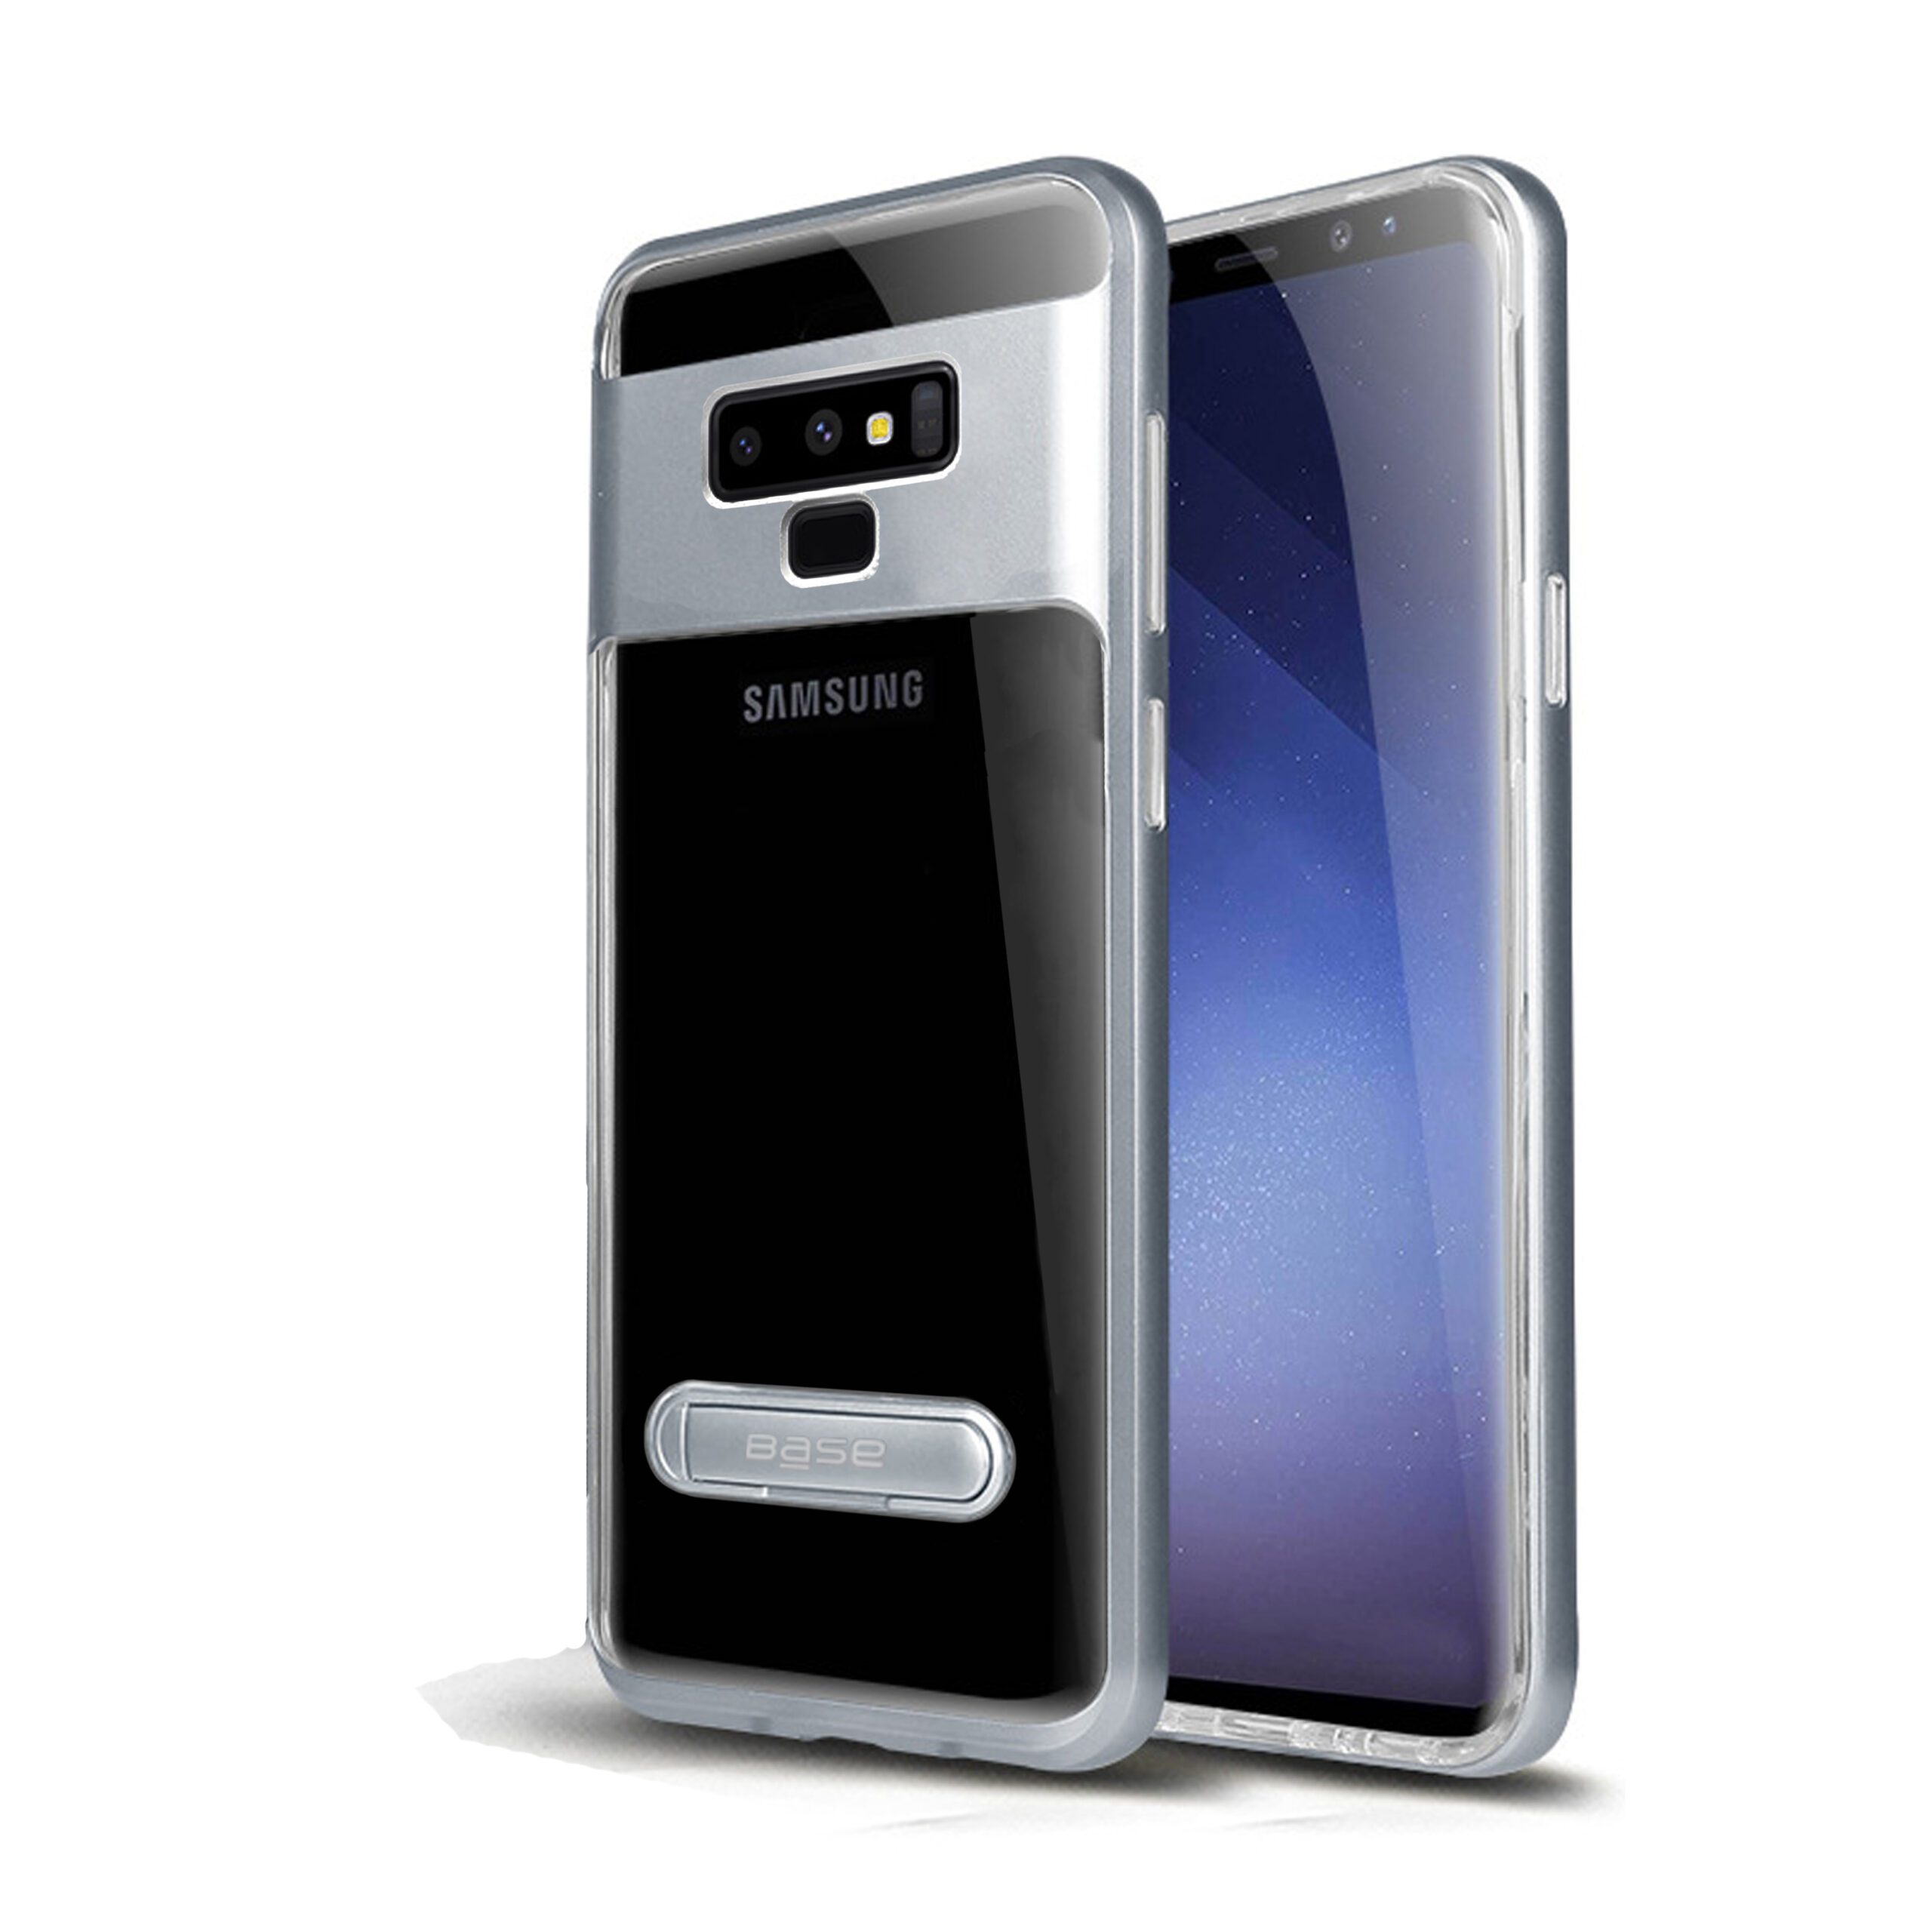 Clear case protector with silver designs and Kickstand for Samsung Note9 cell phones